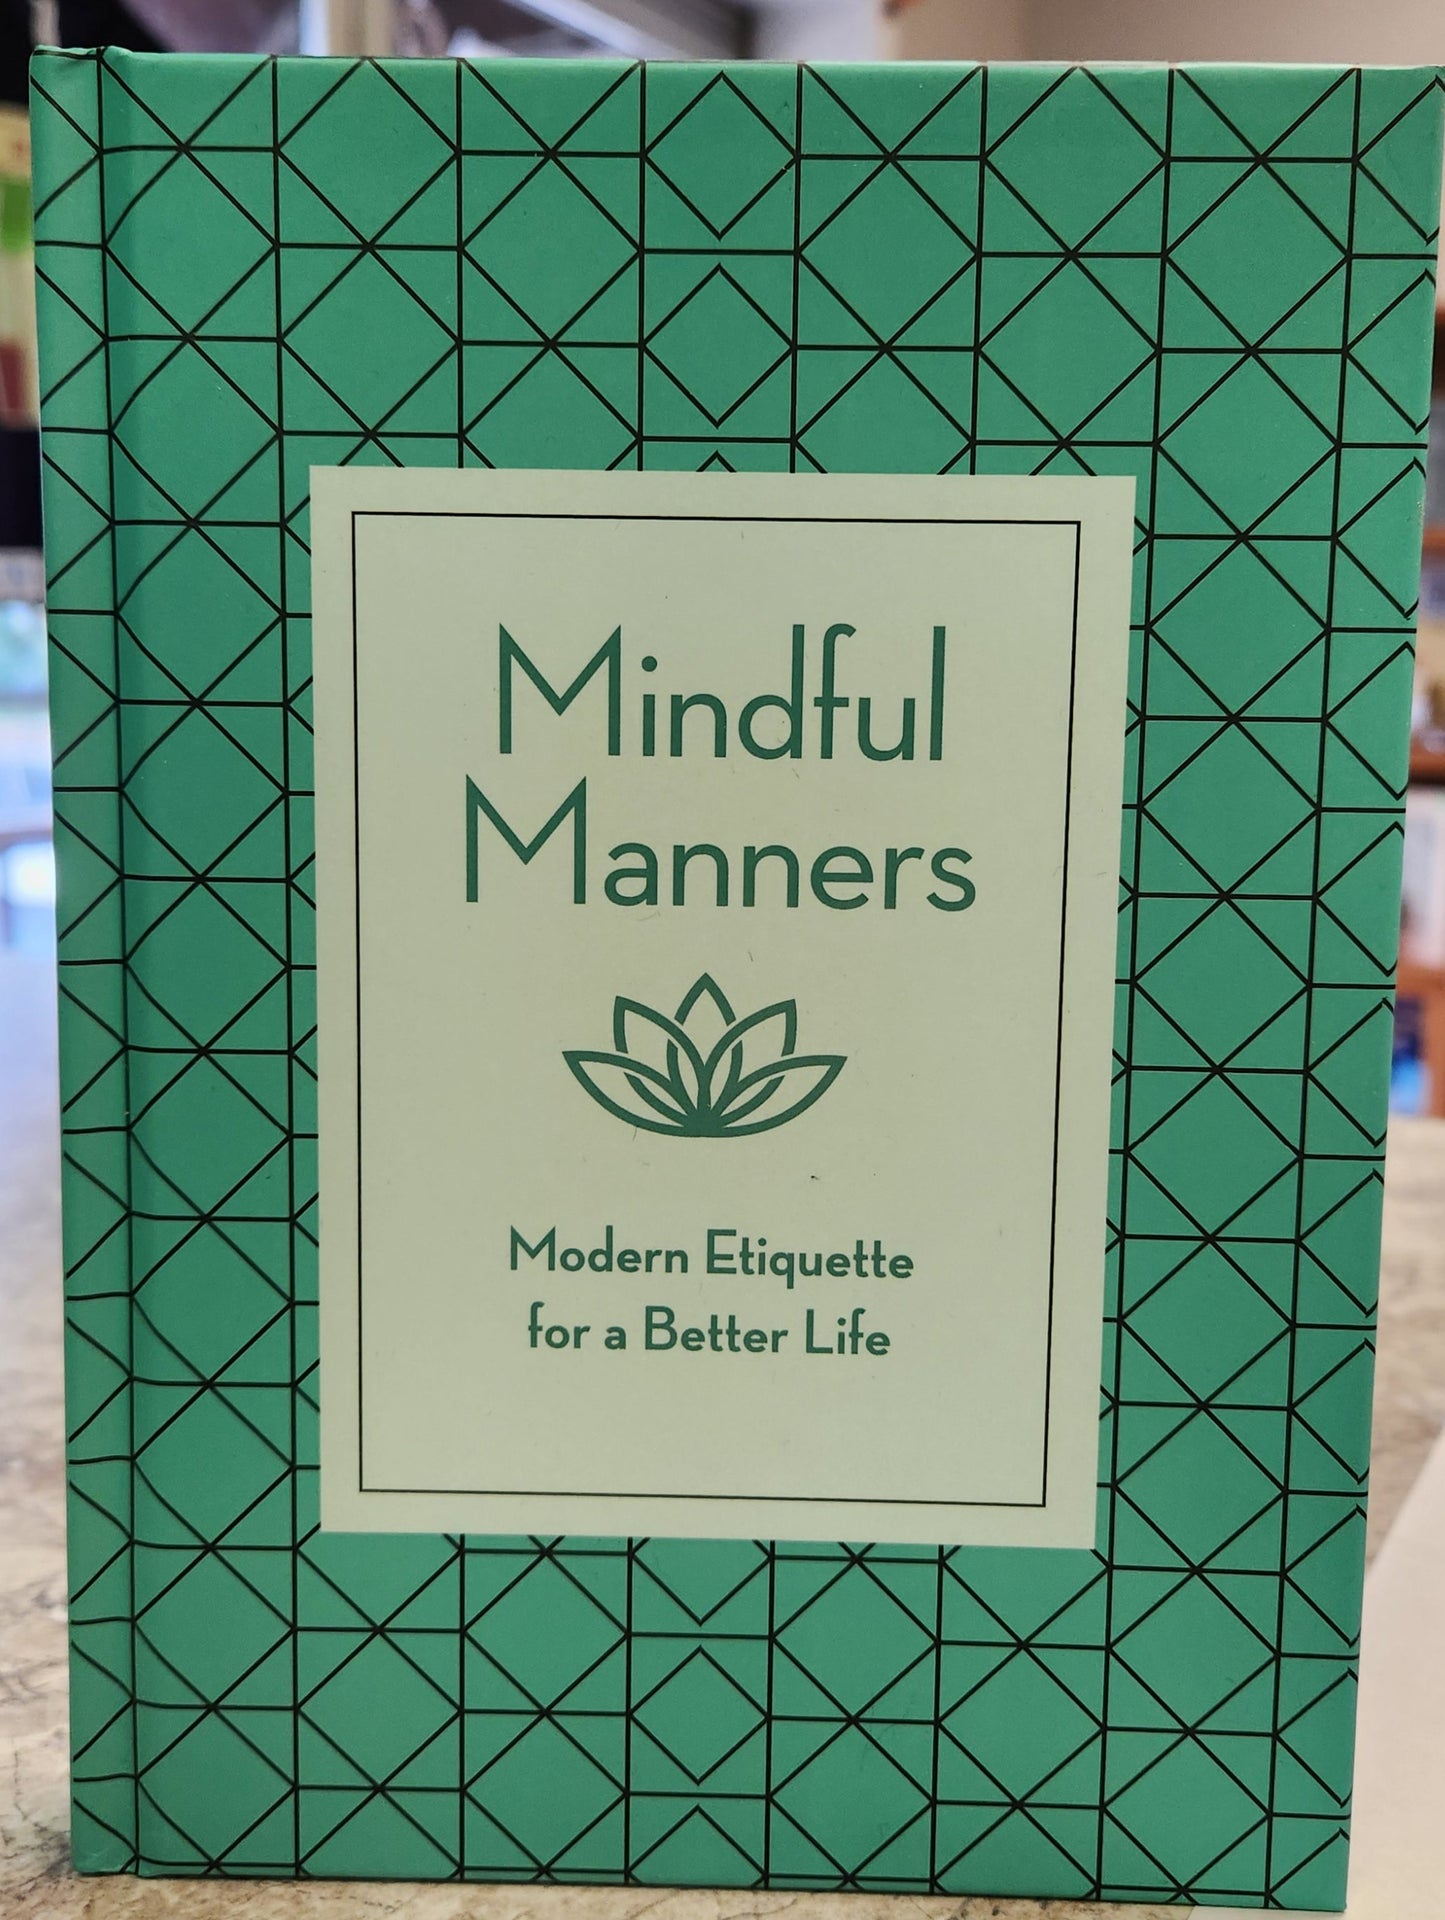 Mindful Manners, Modern Etiquette fo a Better Life.